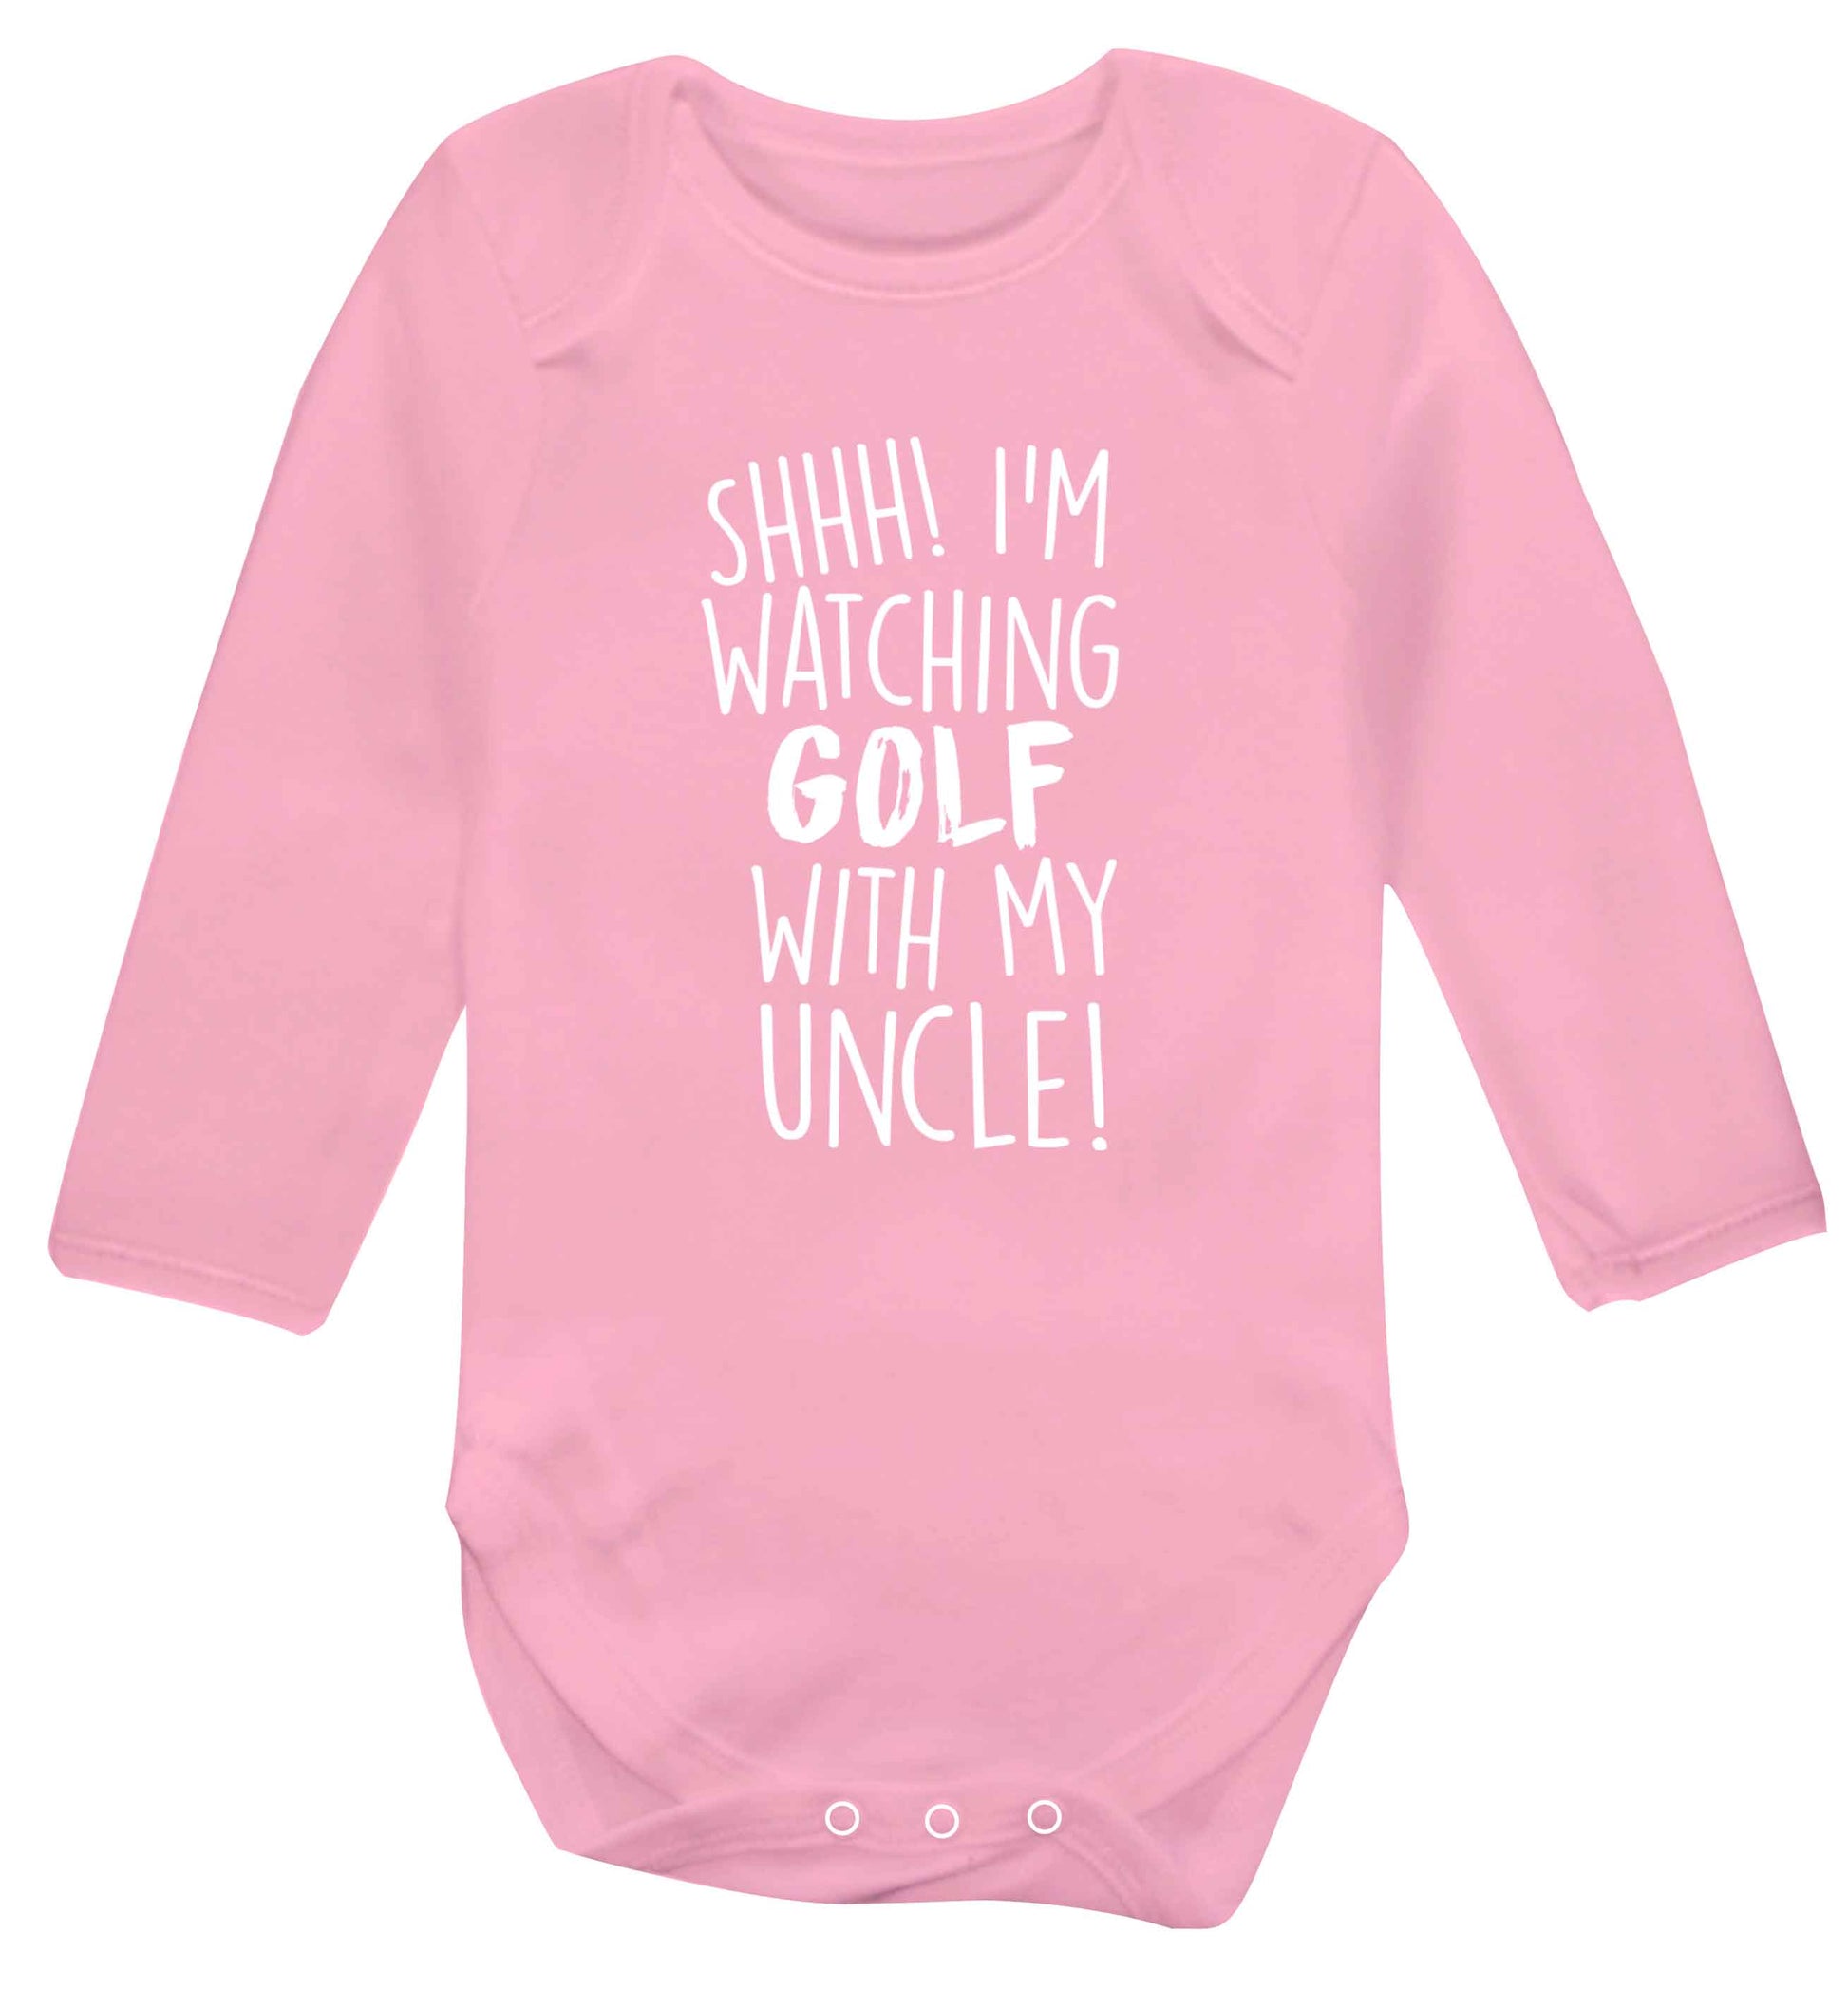 Shh I'm watching golf with my uncle Baby Vest long sleeved pale pink 6-12 months